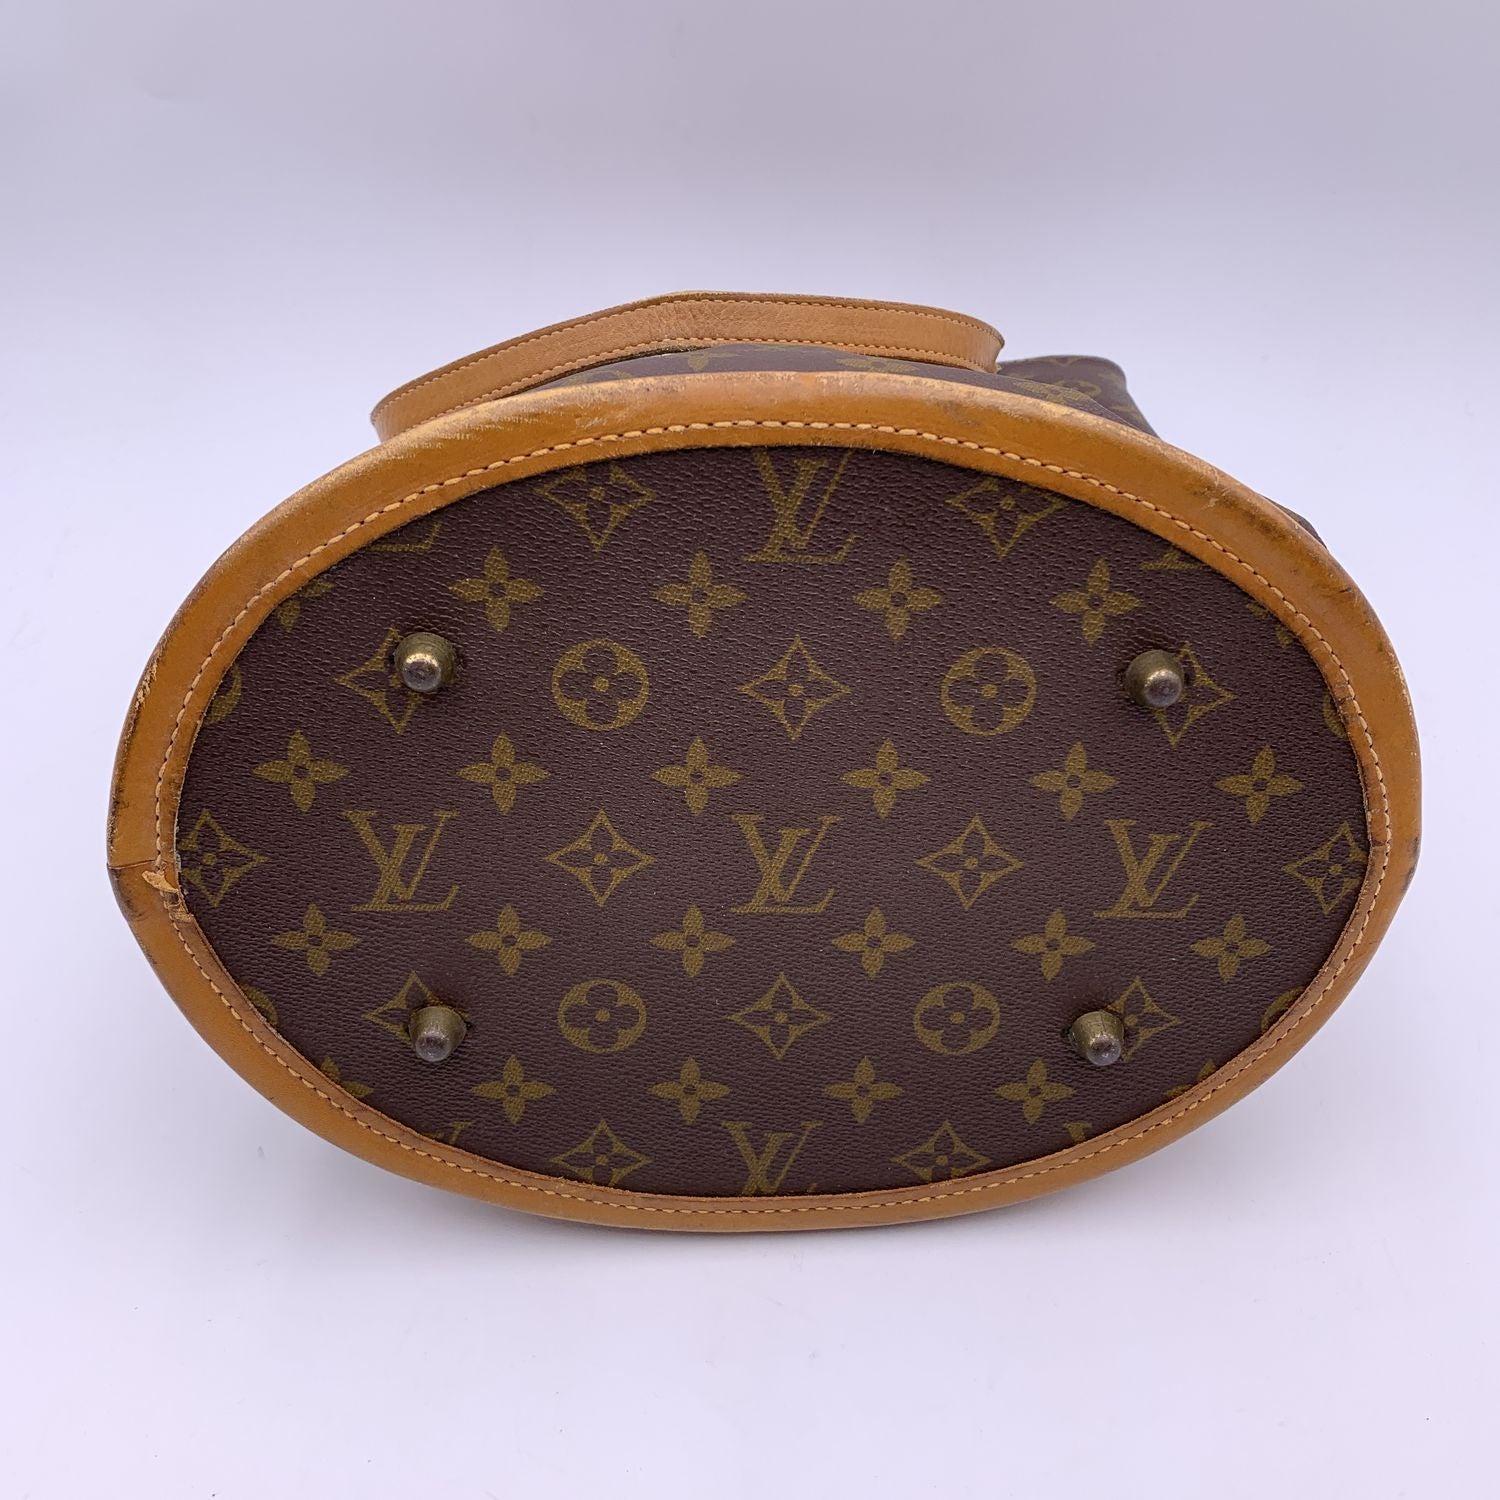 Louis Vuitton Vintage French Co. Made in USA Monogram Large Bucket Bag 1